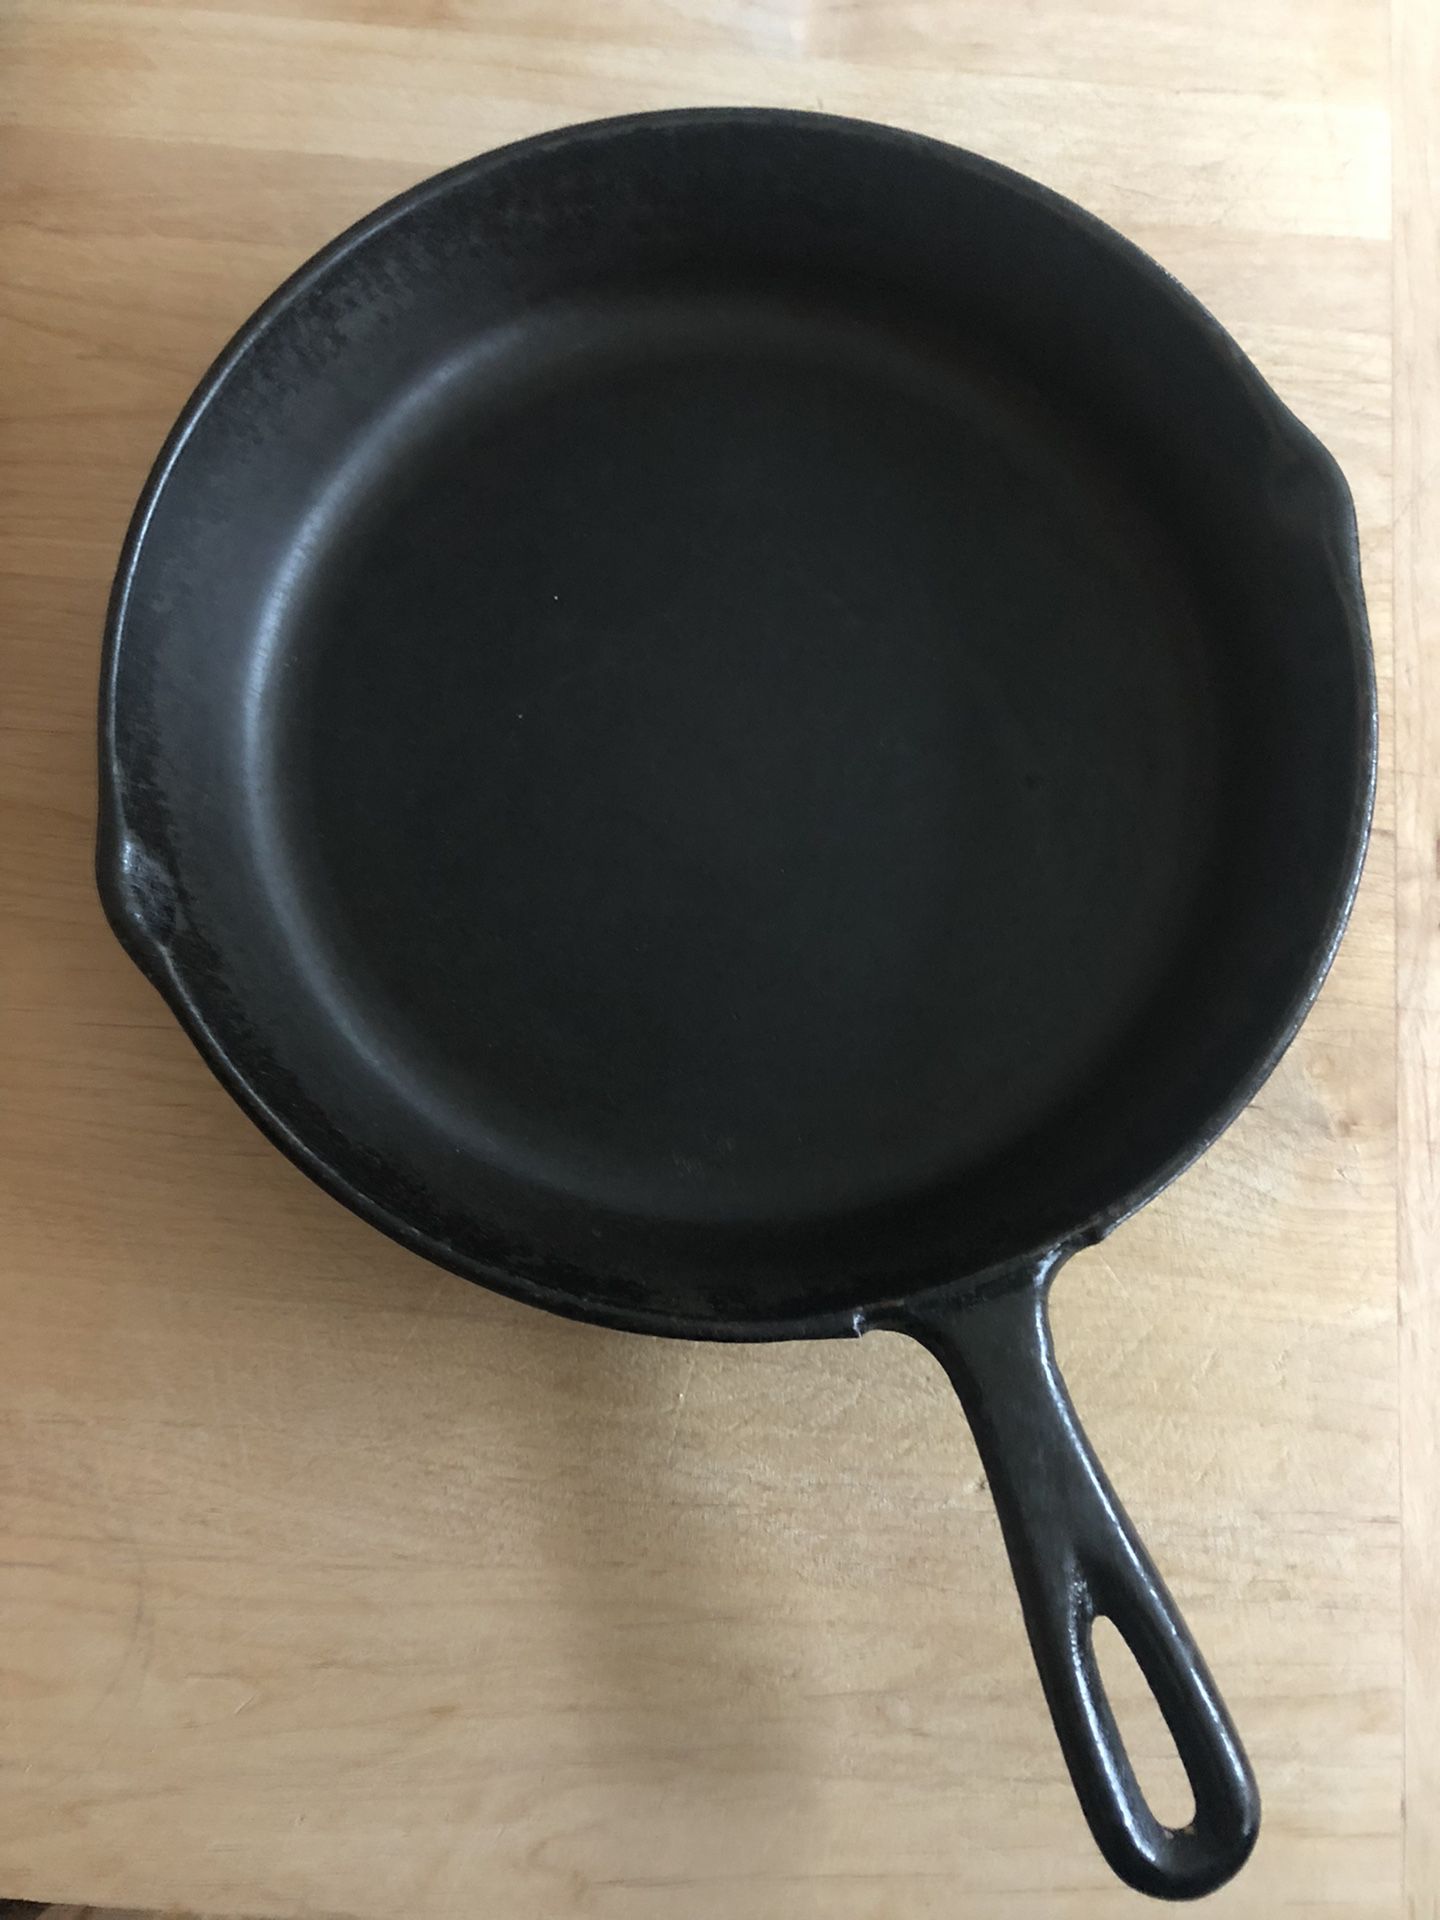 Cookware Set for Sale in Mount Vernon, WA - OfferUp